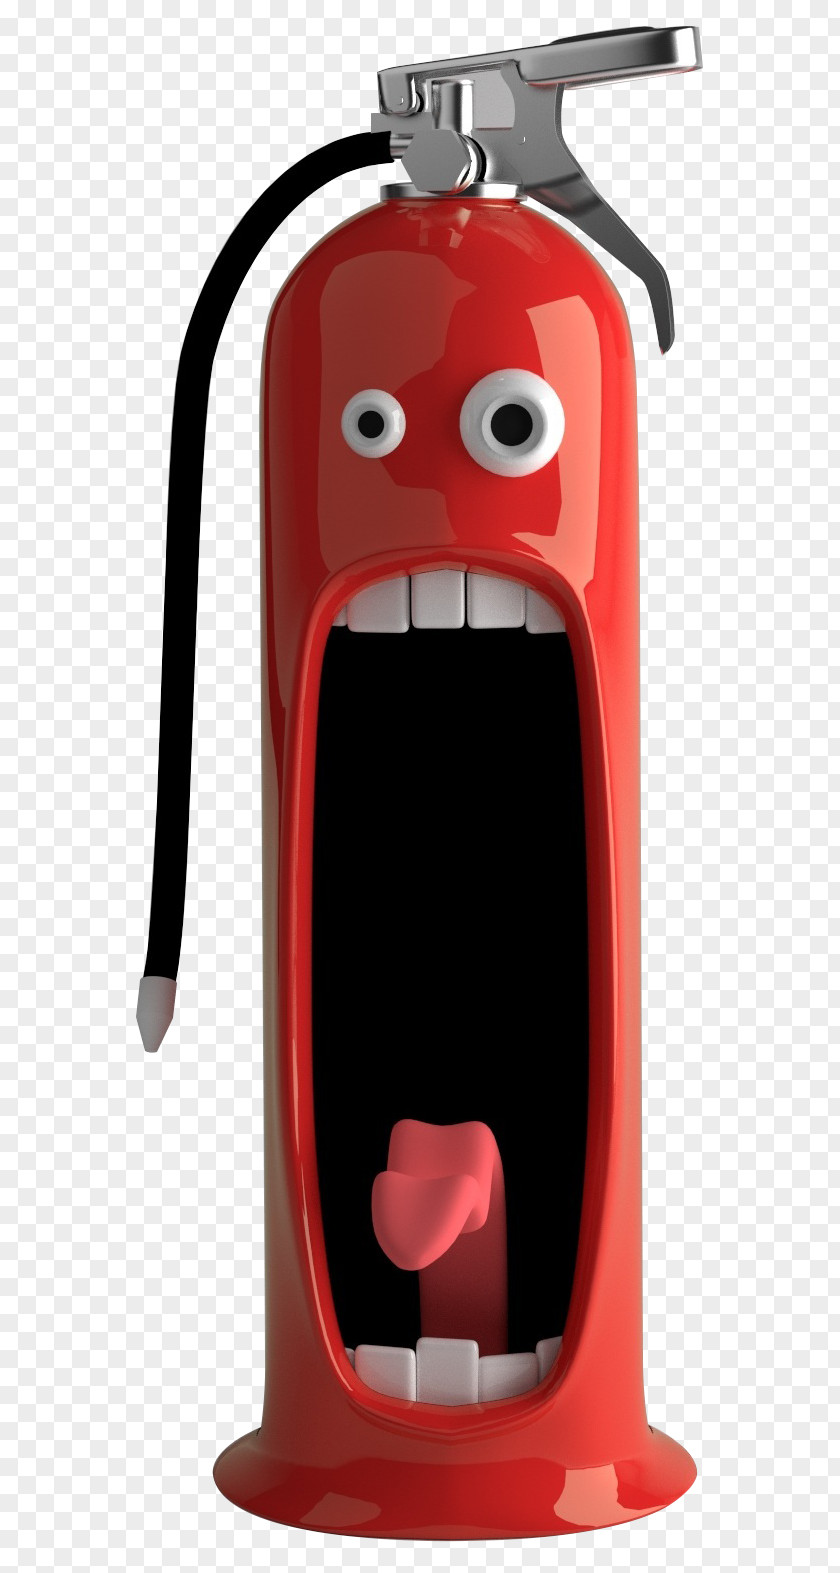 Terrified Expression Extinguisher PNG